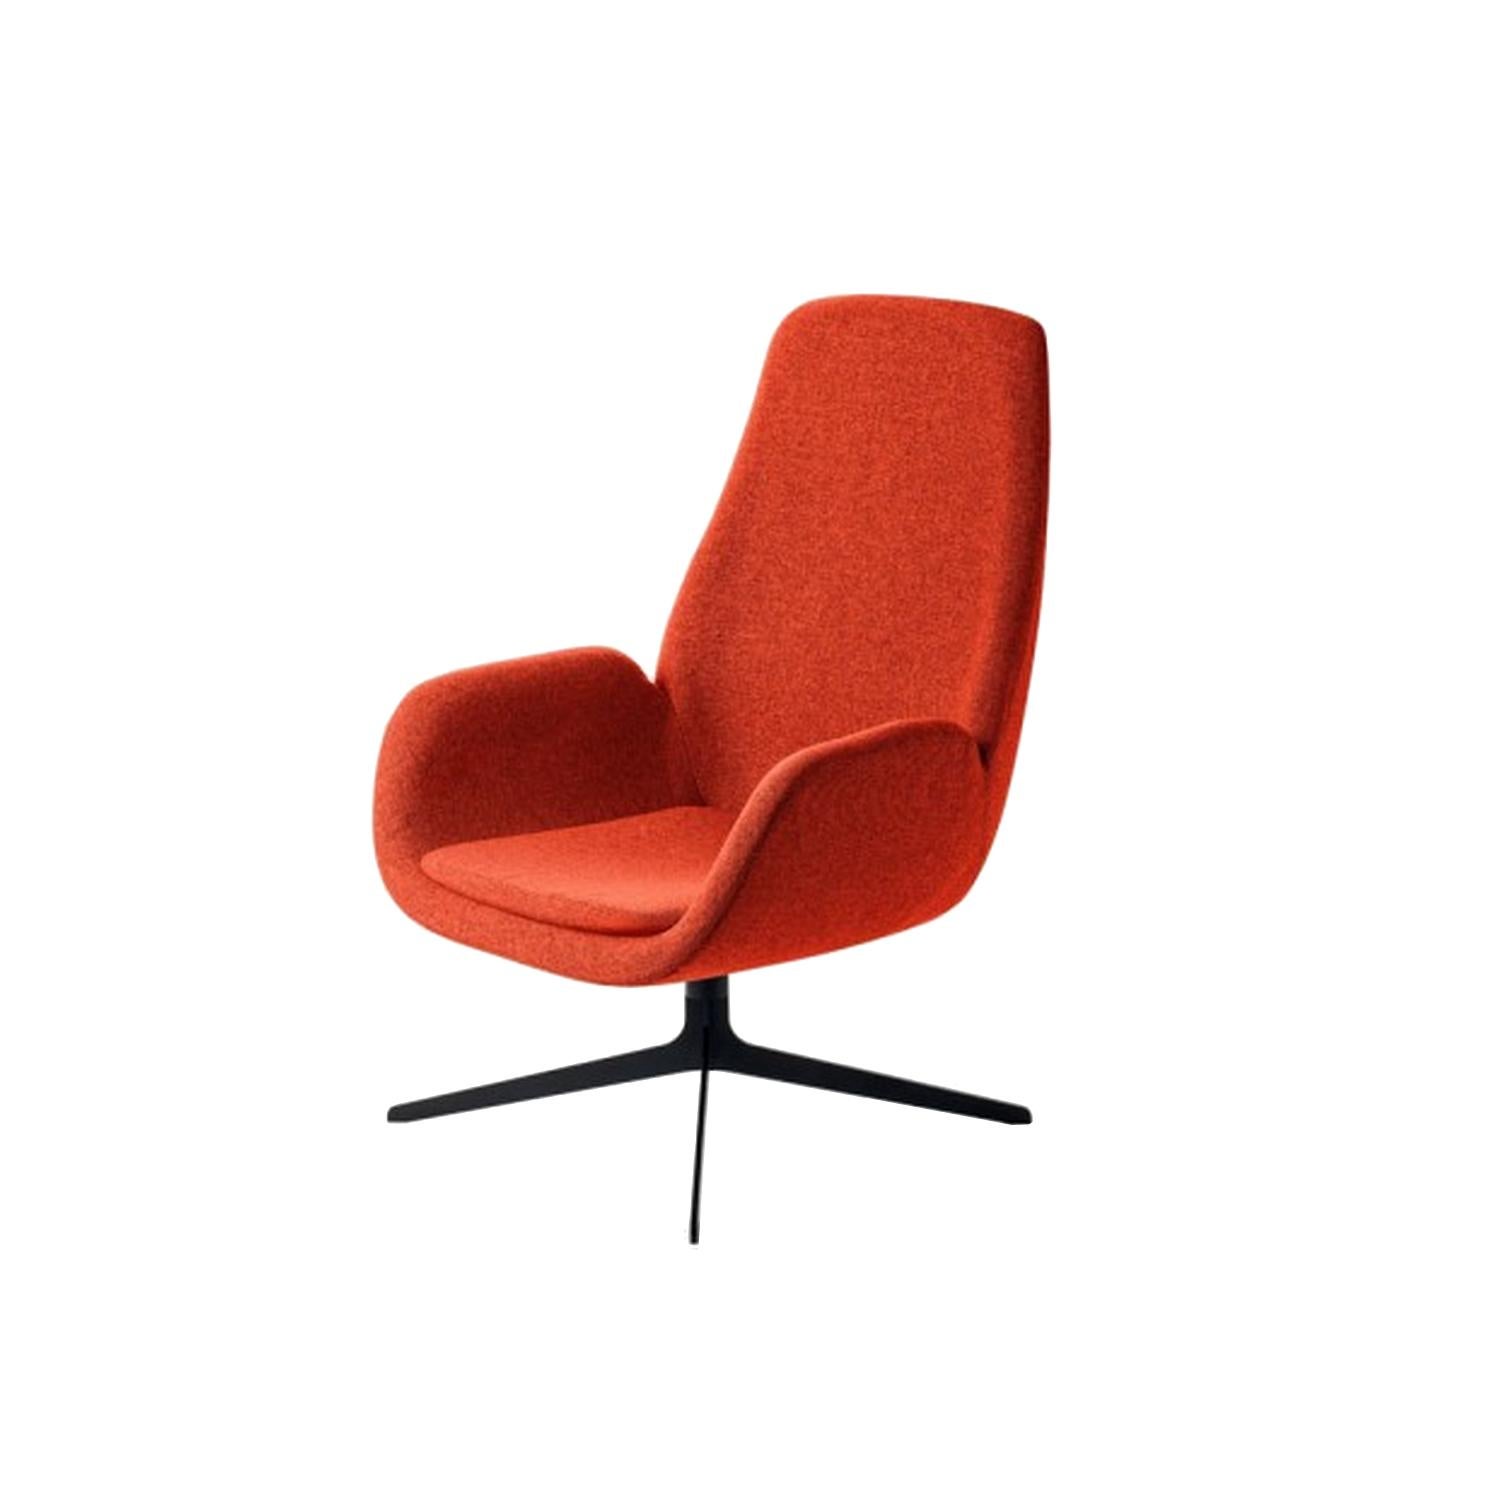 Modern Red Mysa Lounge Chair, Designed by Michael Schmidt, Made in Italy For Sale